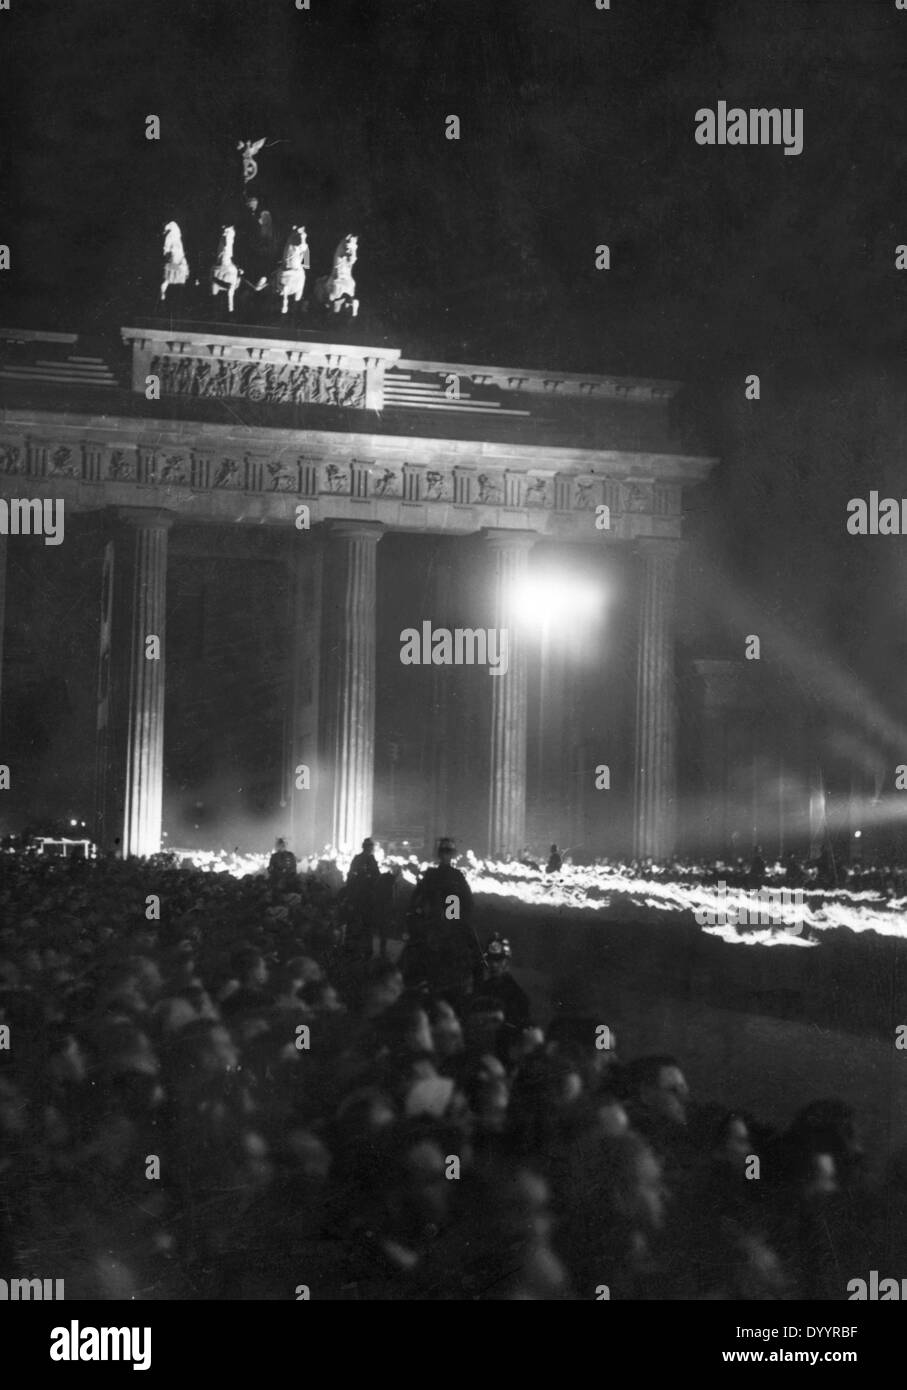 Torchlight procession in Berlin on the 'Day of Potsdam', 1933 Stock Photo